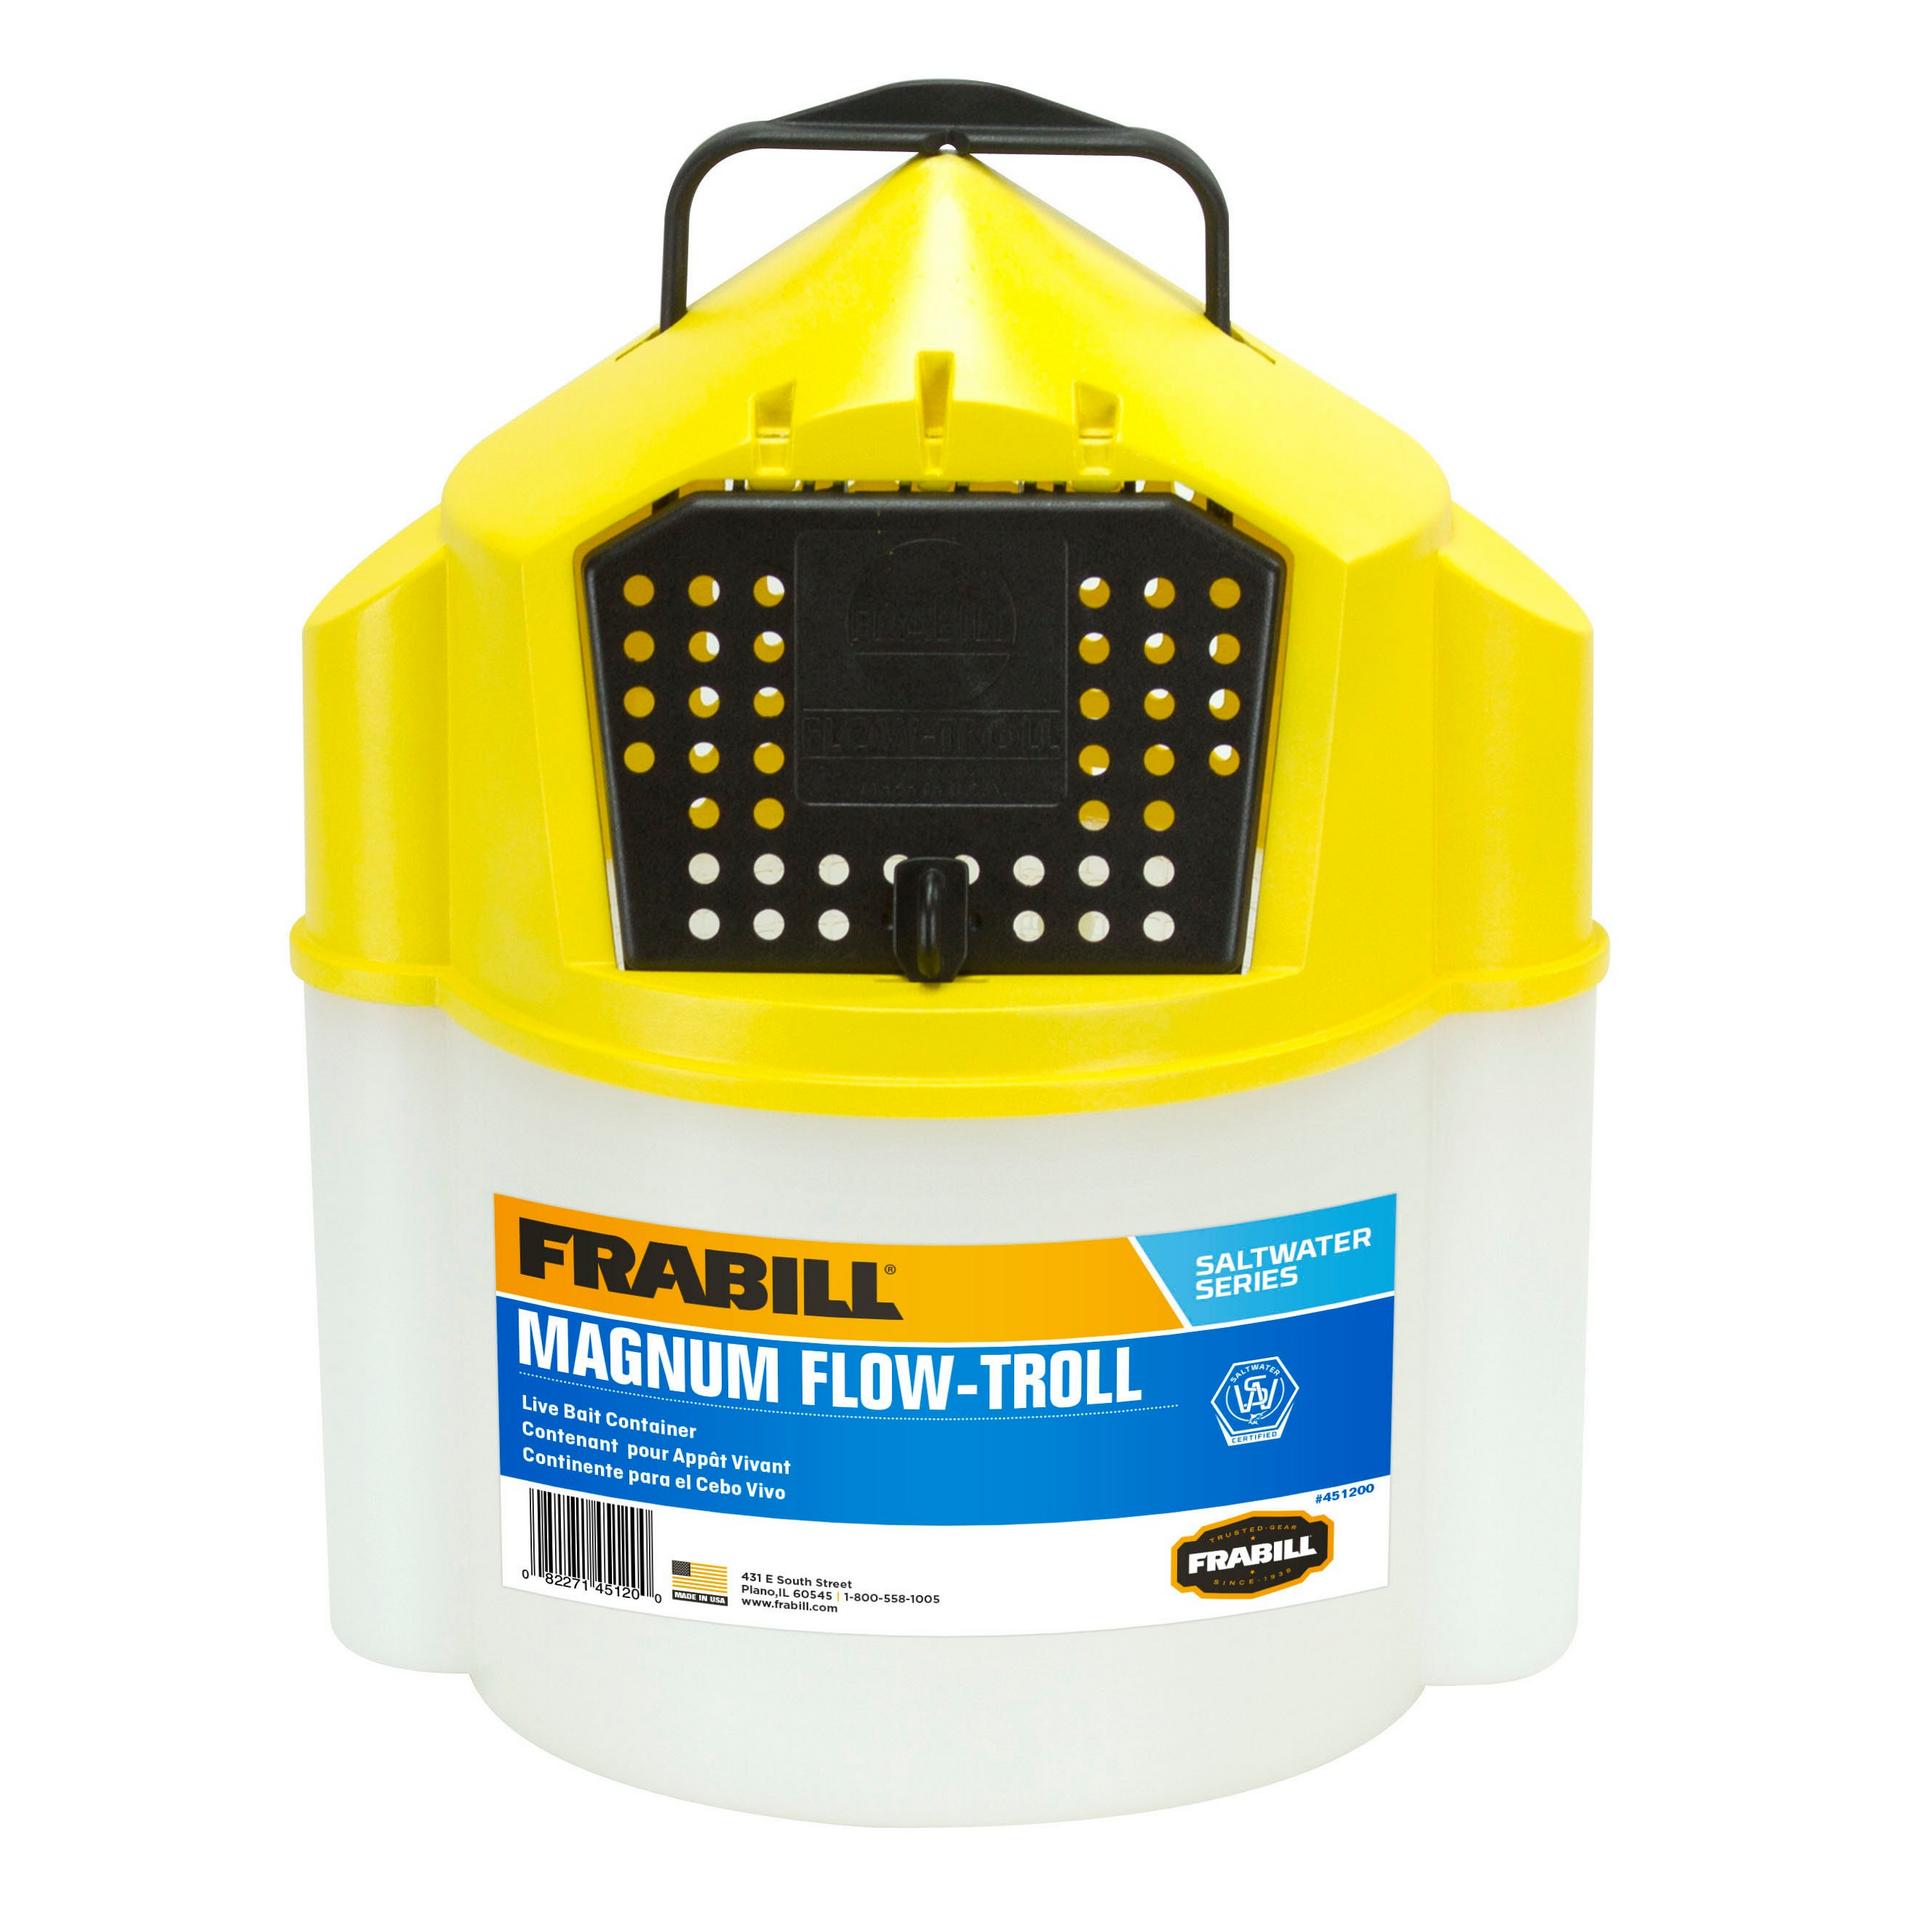 Frabill - The Frabill Magnum Bait Station 30 was designed for anglers who  fish more and fish bigger. Able to aerate up to 30 gallons, it's a great  way to keep large